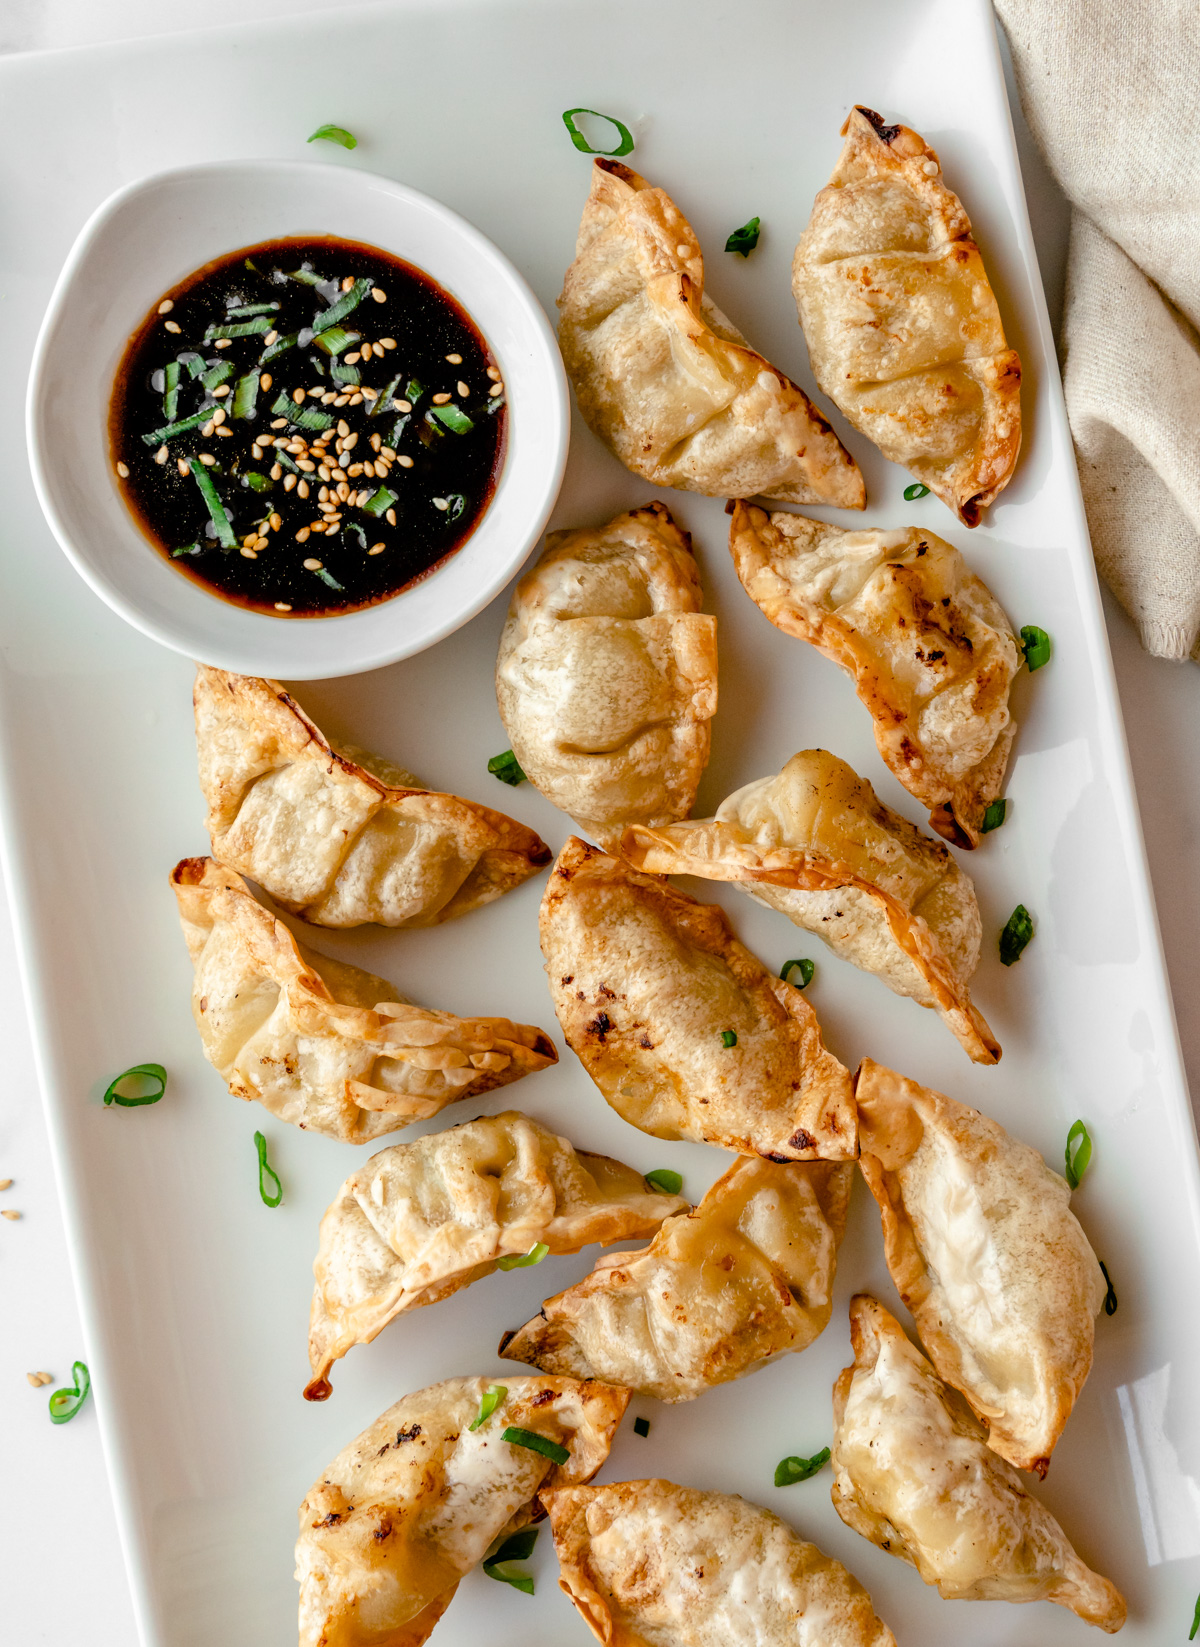 Dumplings with bowl of dipping sauce